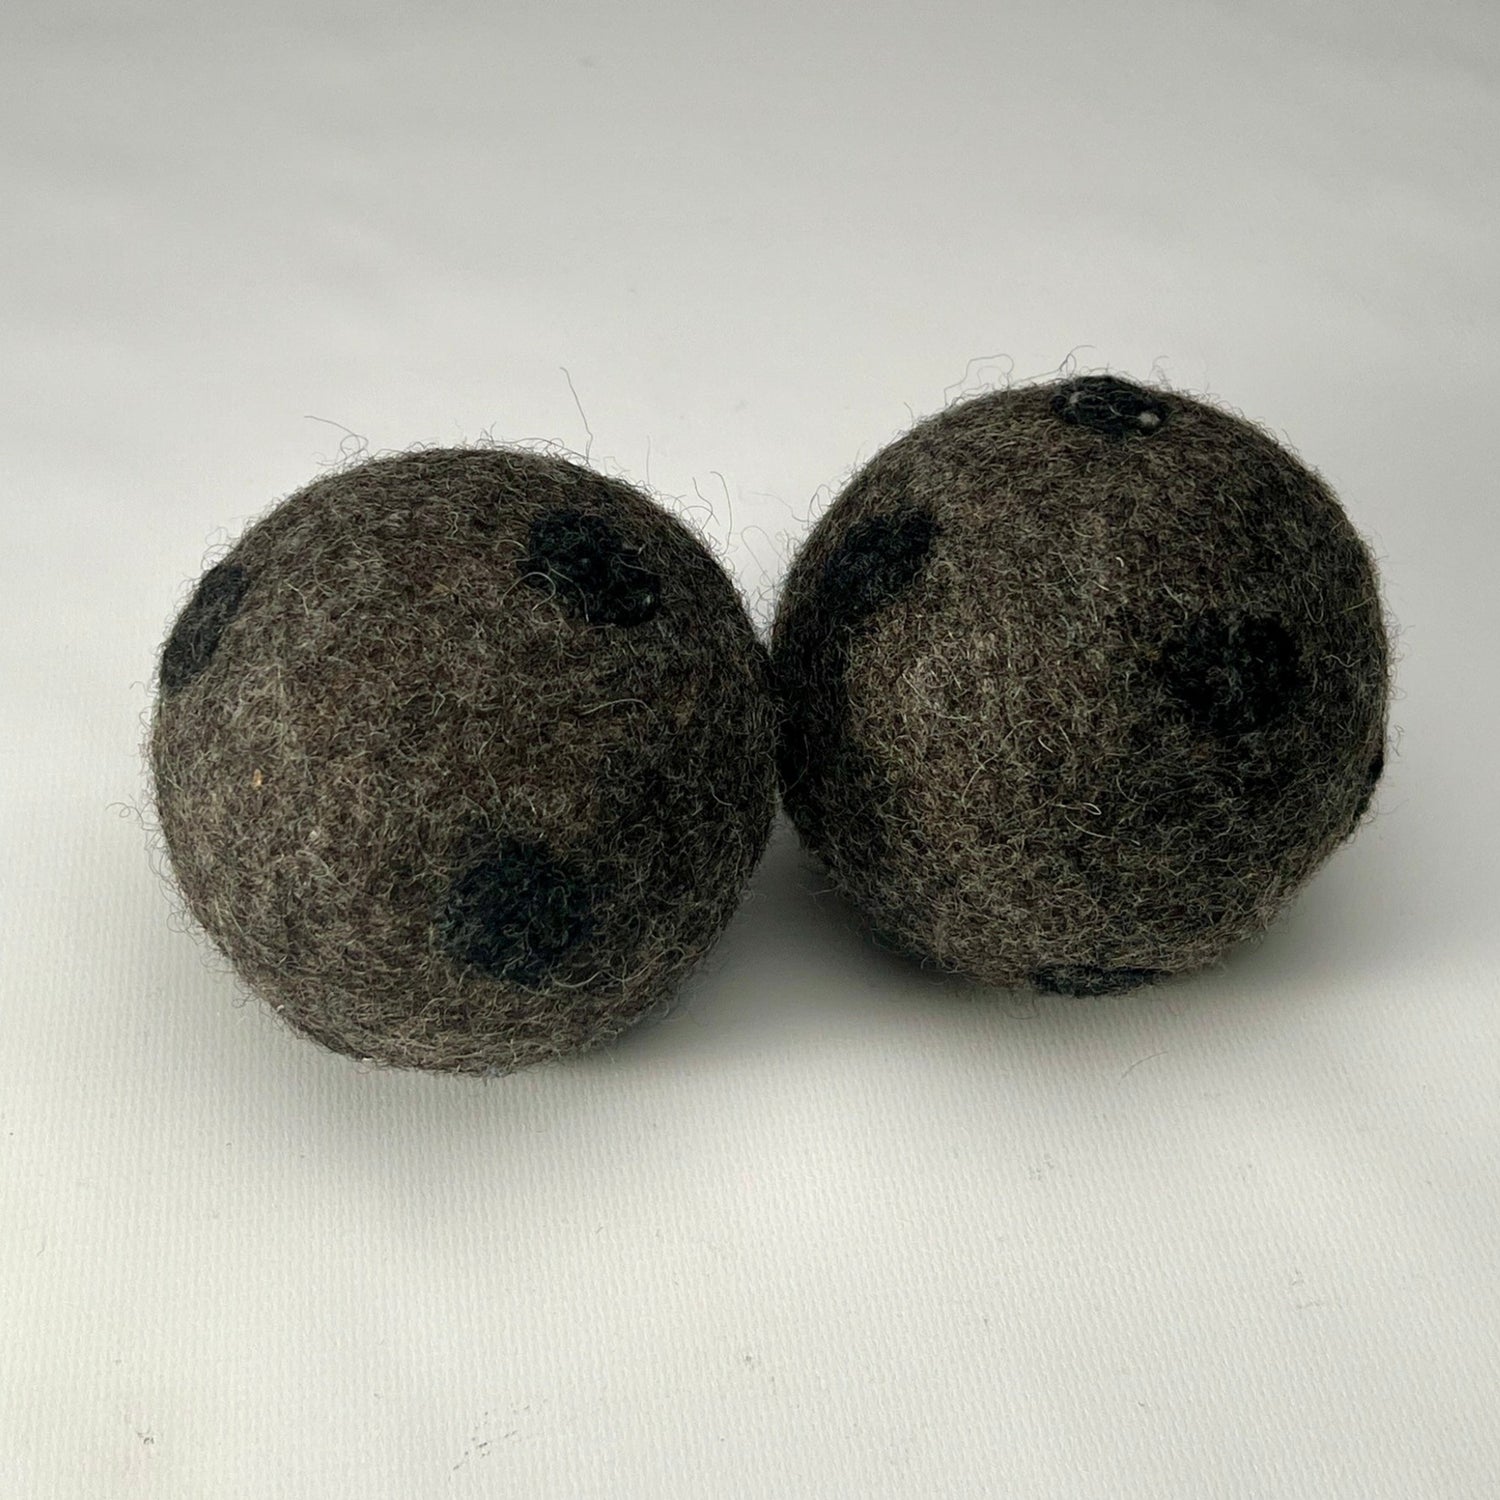 Dog Toys - two large, soft felt indoor catch balls for dogs. Grey woolen colour with black polka dots catchballs